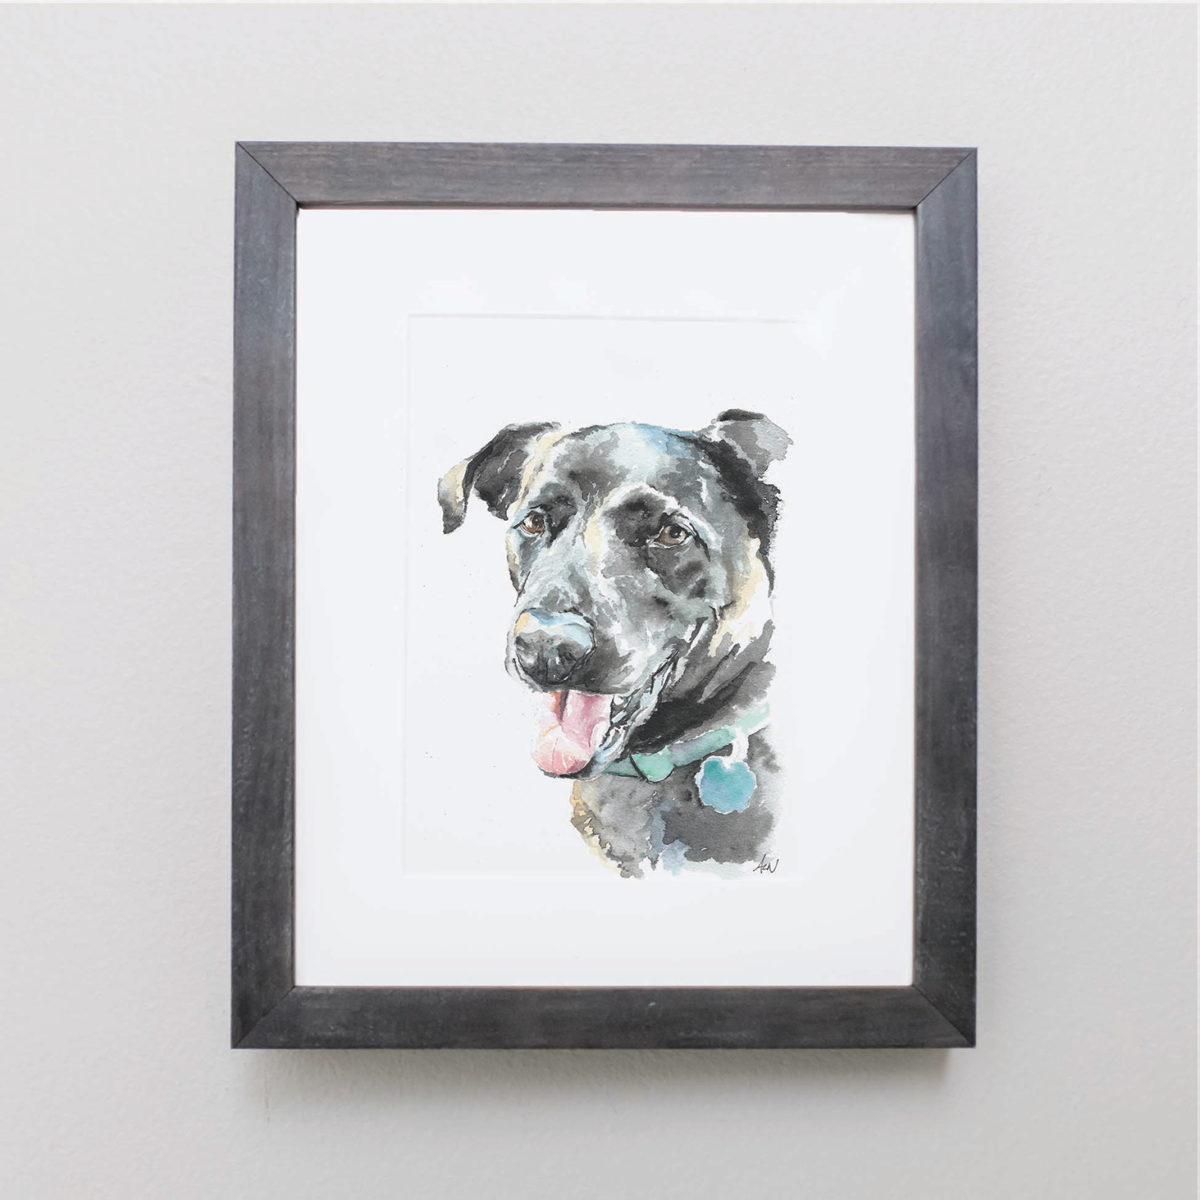 Watercolor of a black lab in a gray frame